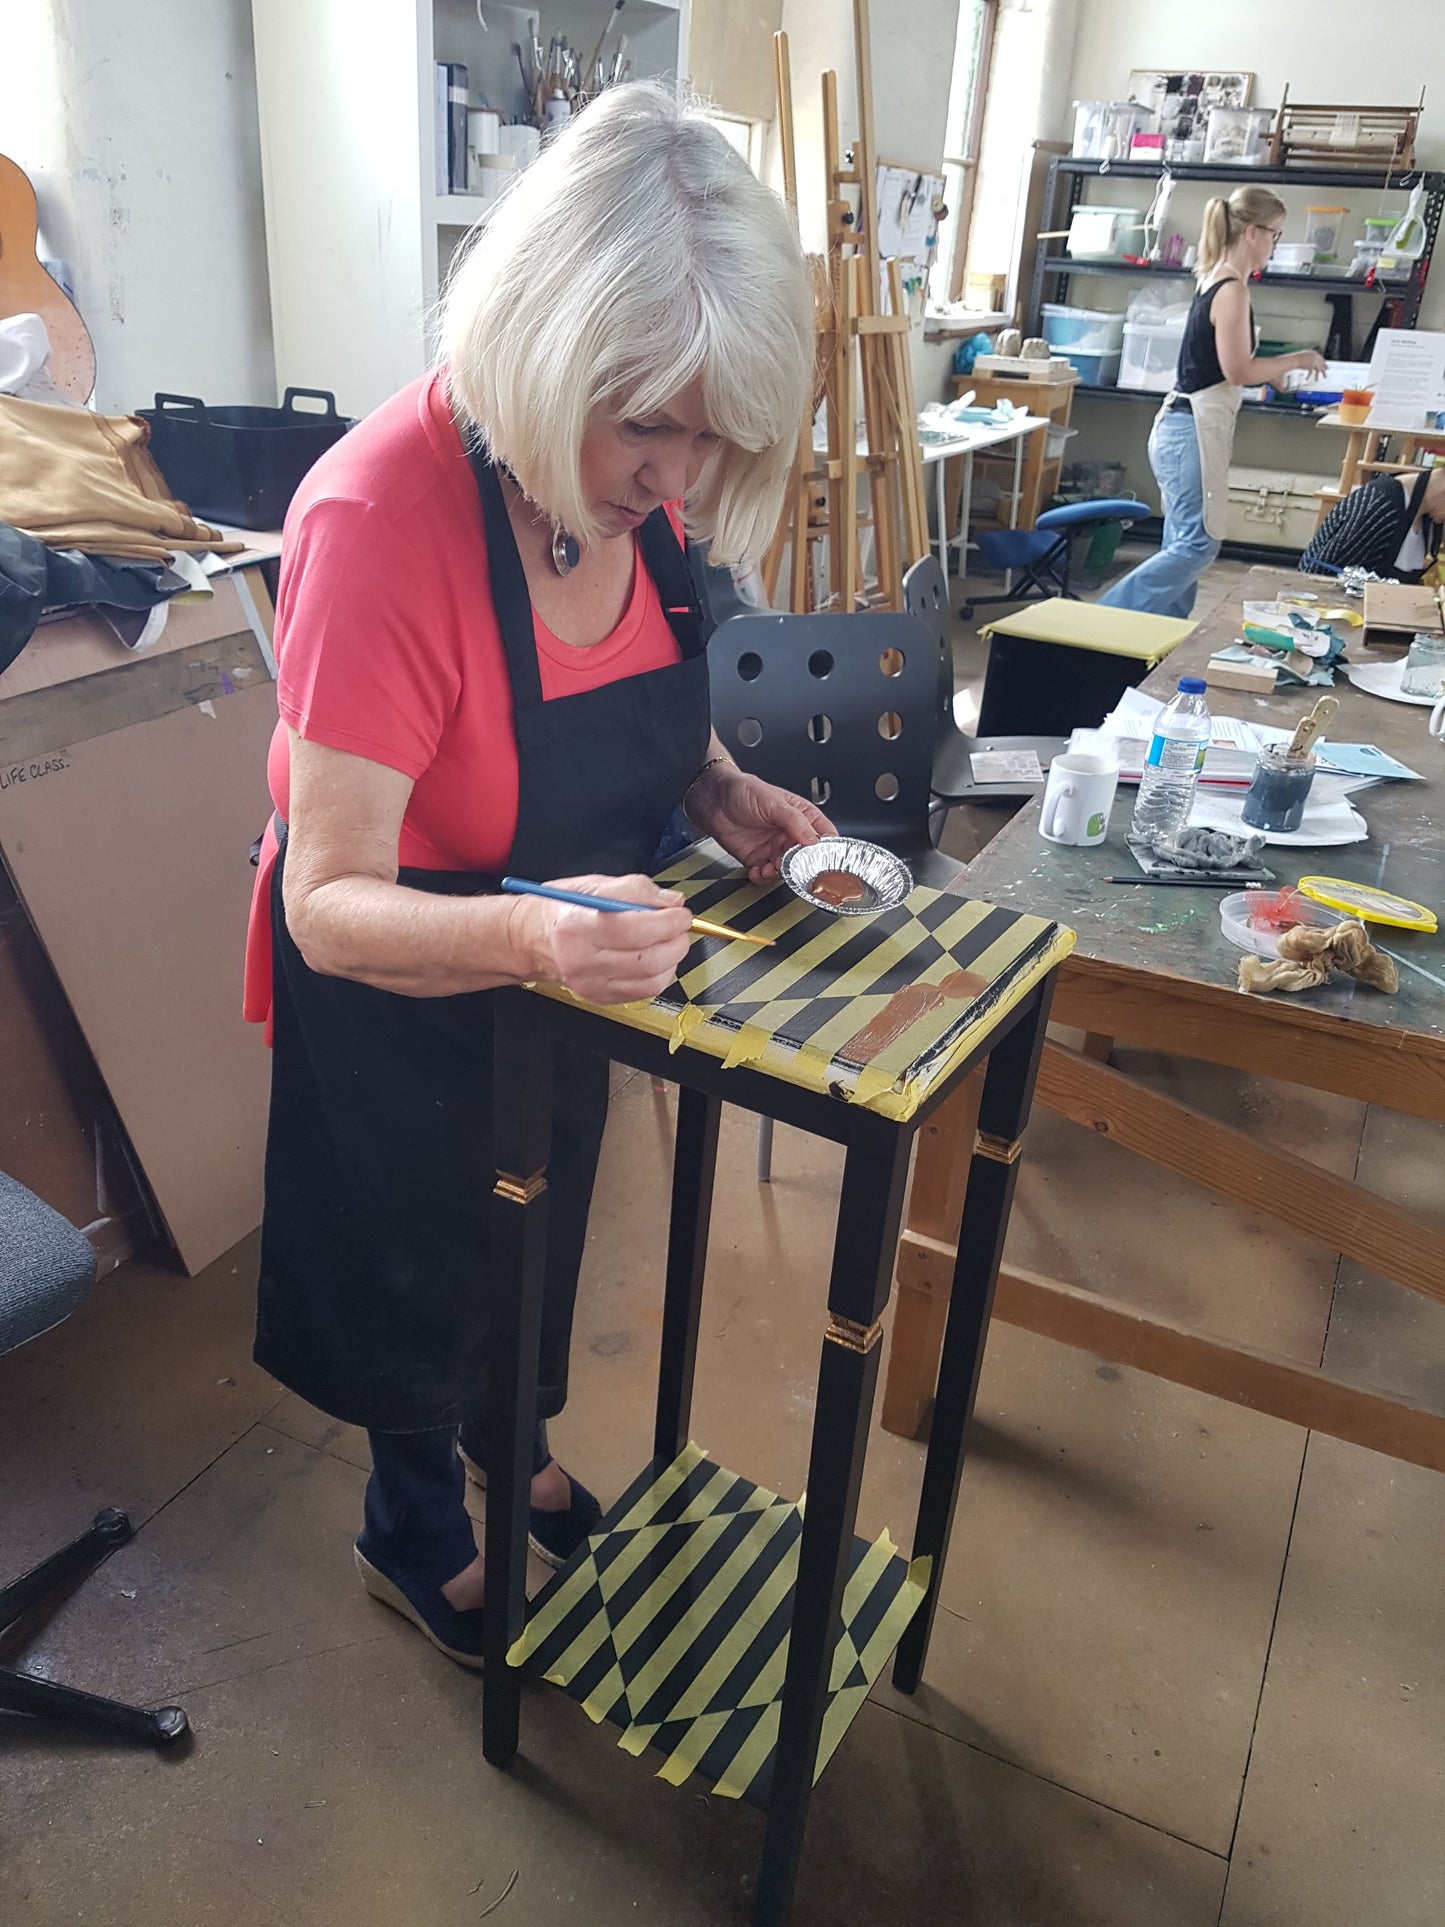 ONE DAY WORKSHOP: Learn Furniture Upcycling & Design - Dates available